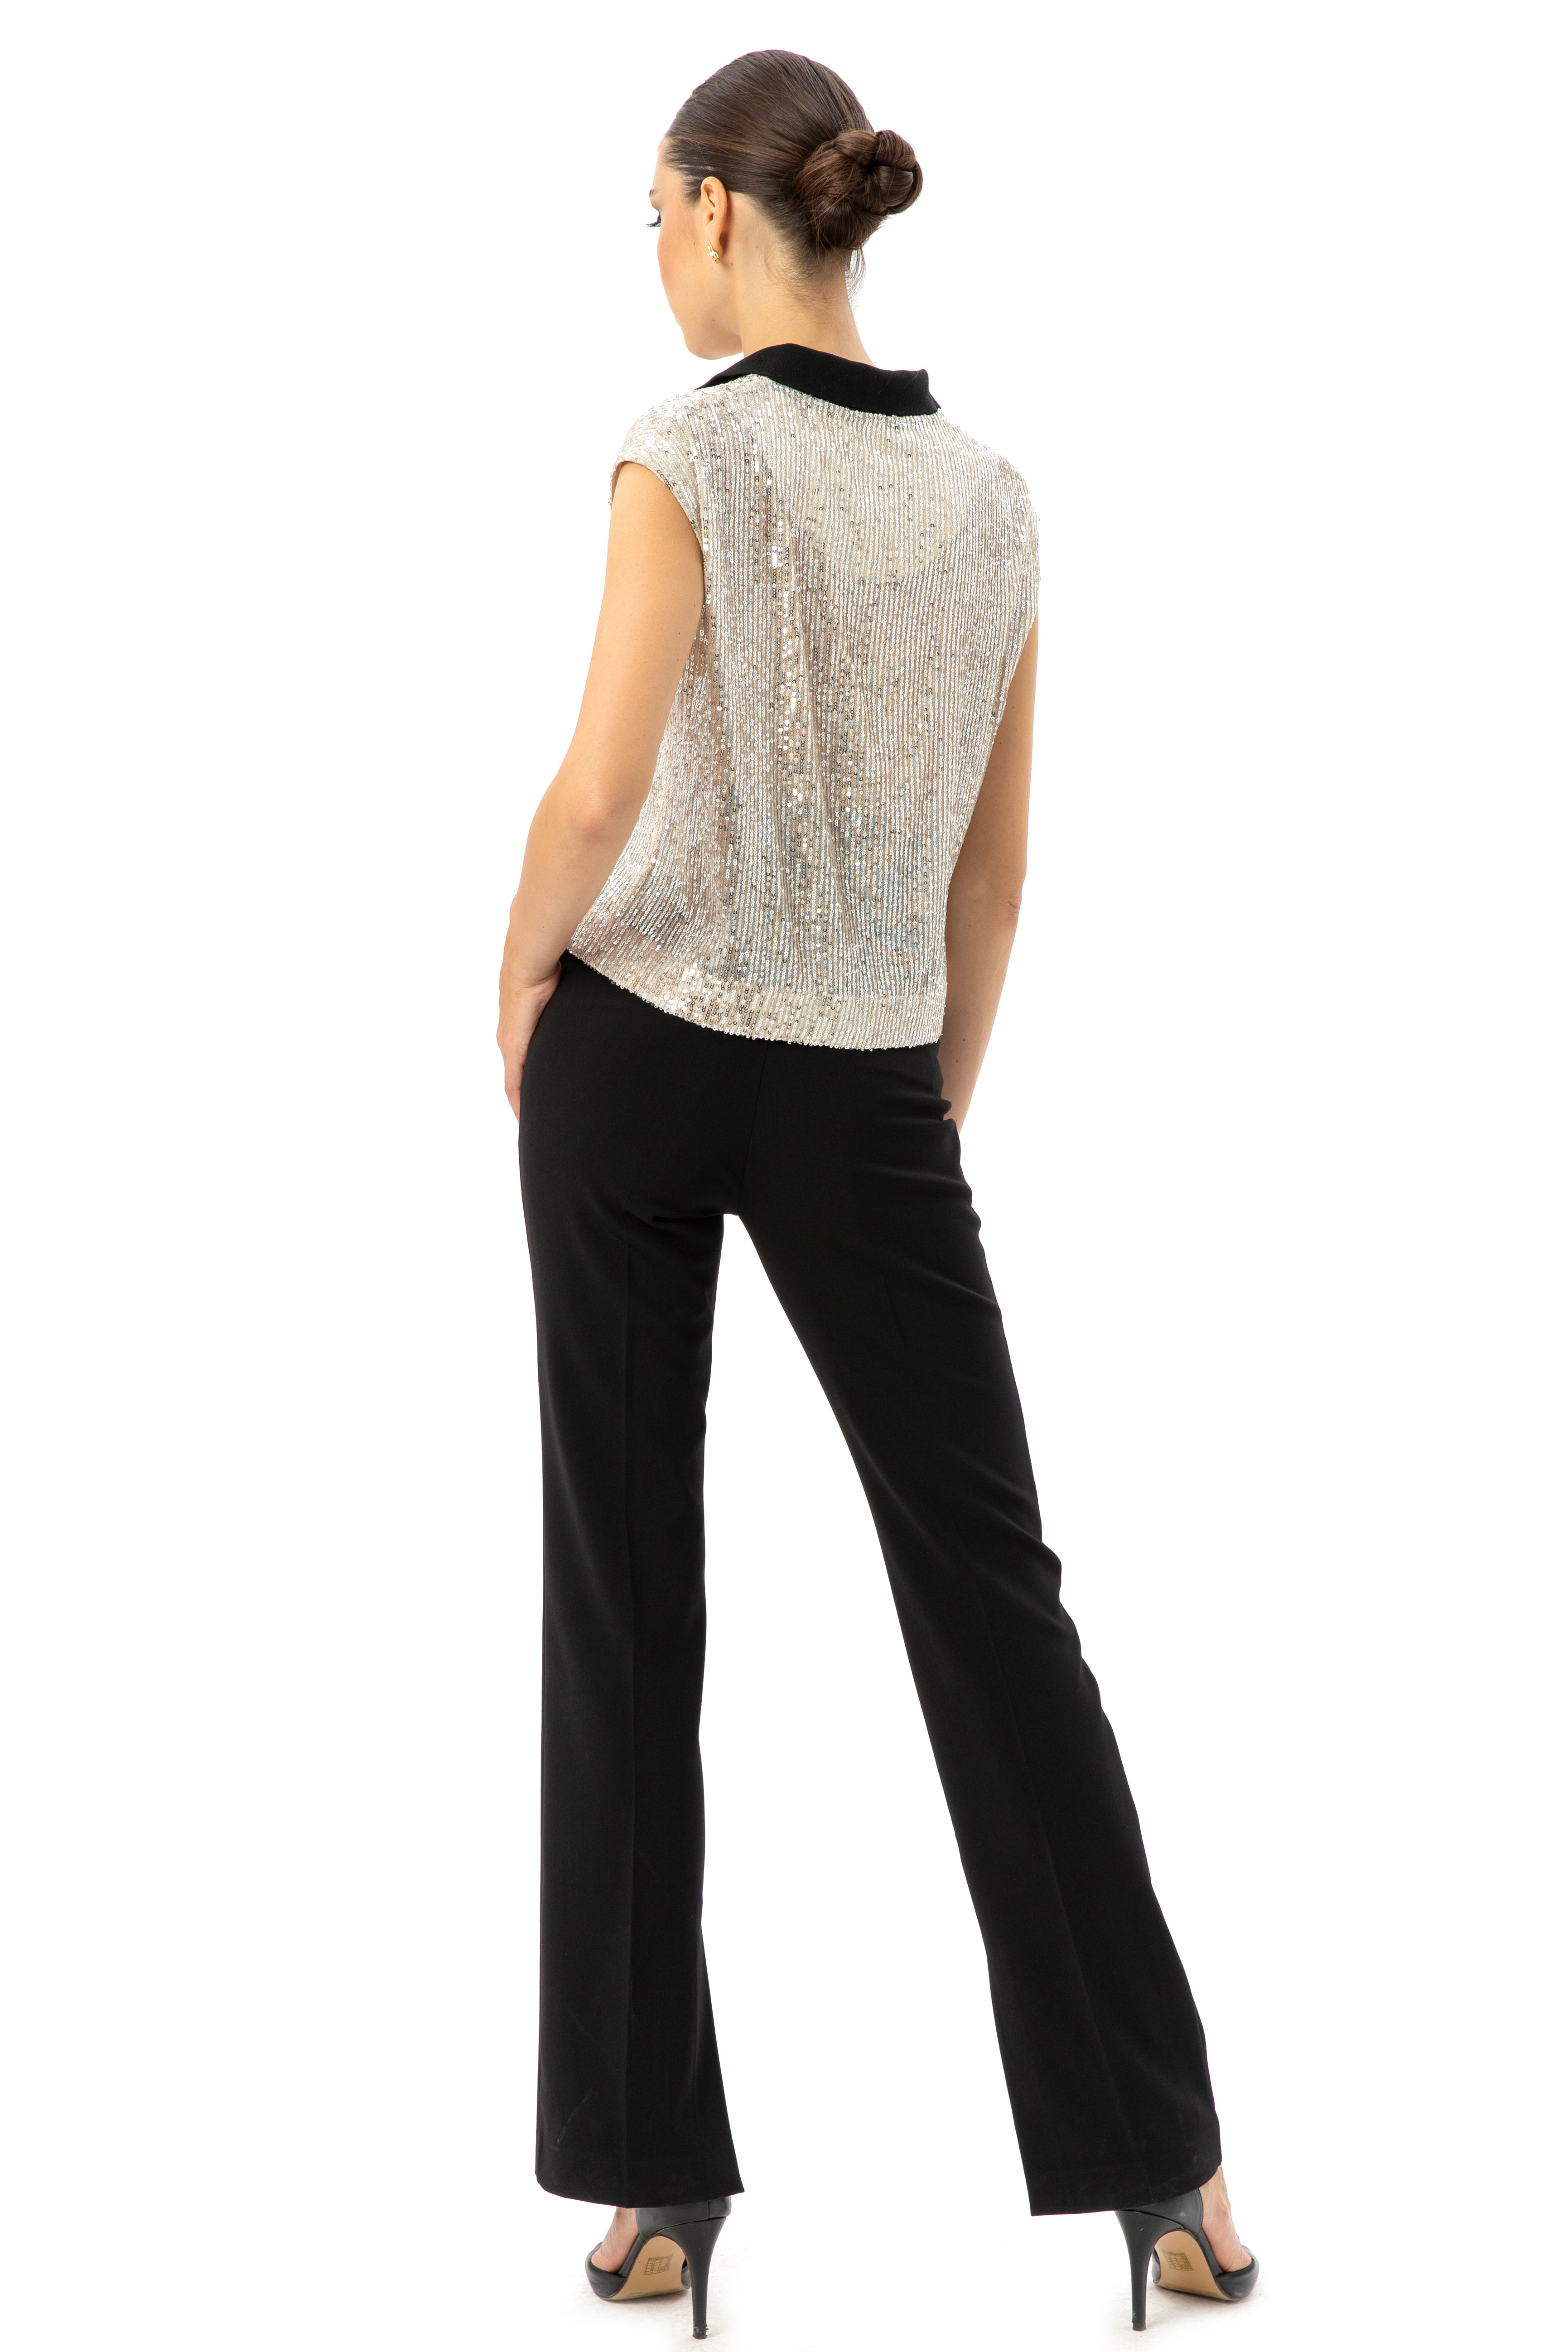 High Waist Trousers With A Slit In The Leg